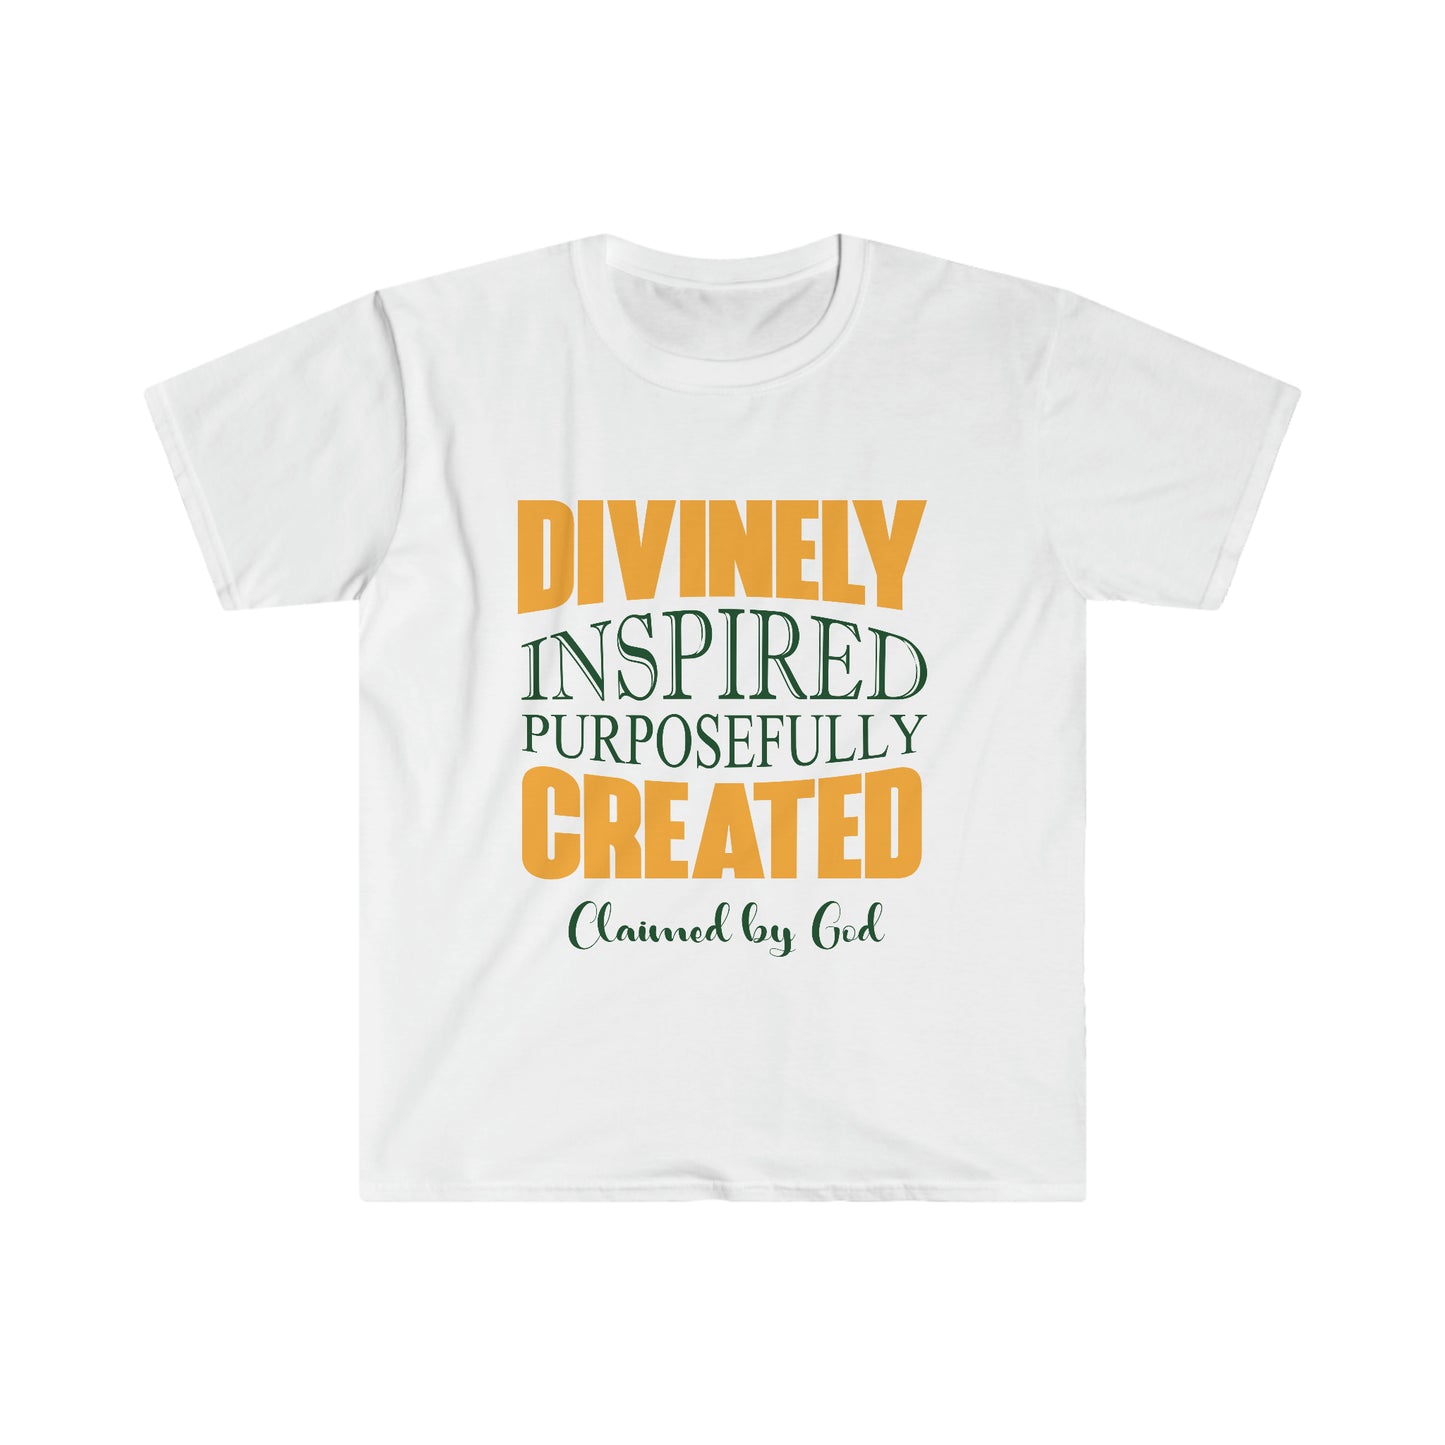 Divinely inspired purposefully created Unisex T-shirt